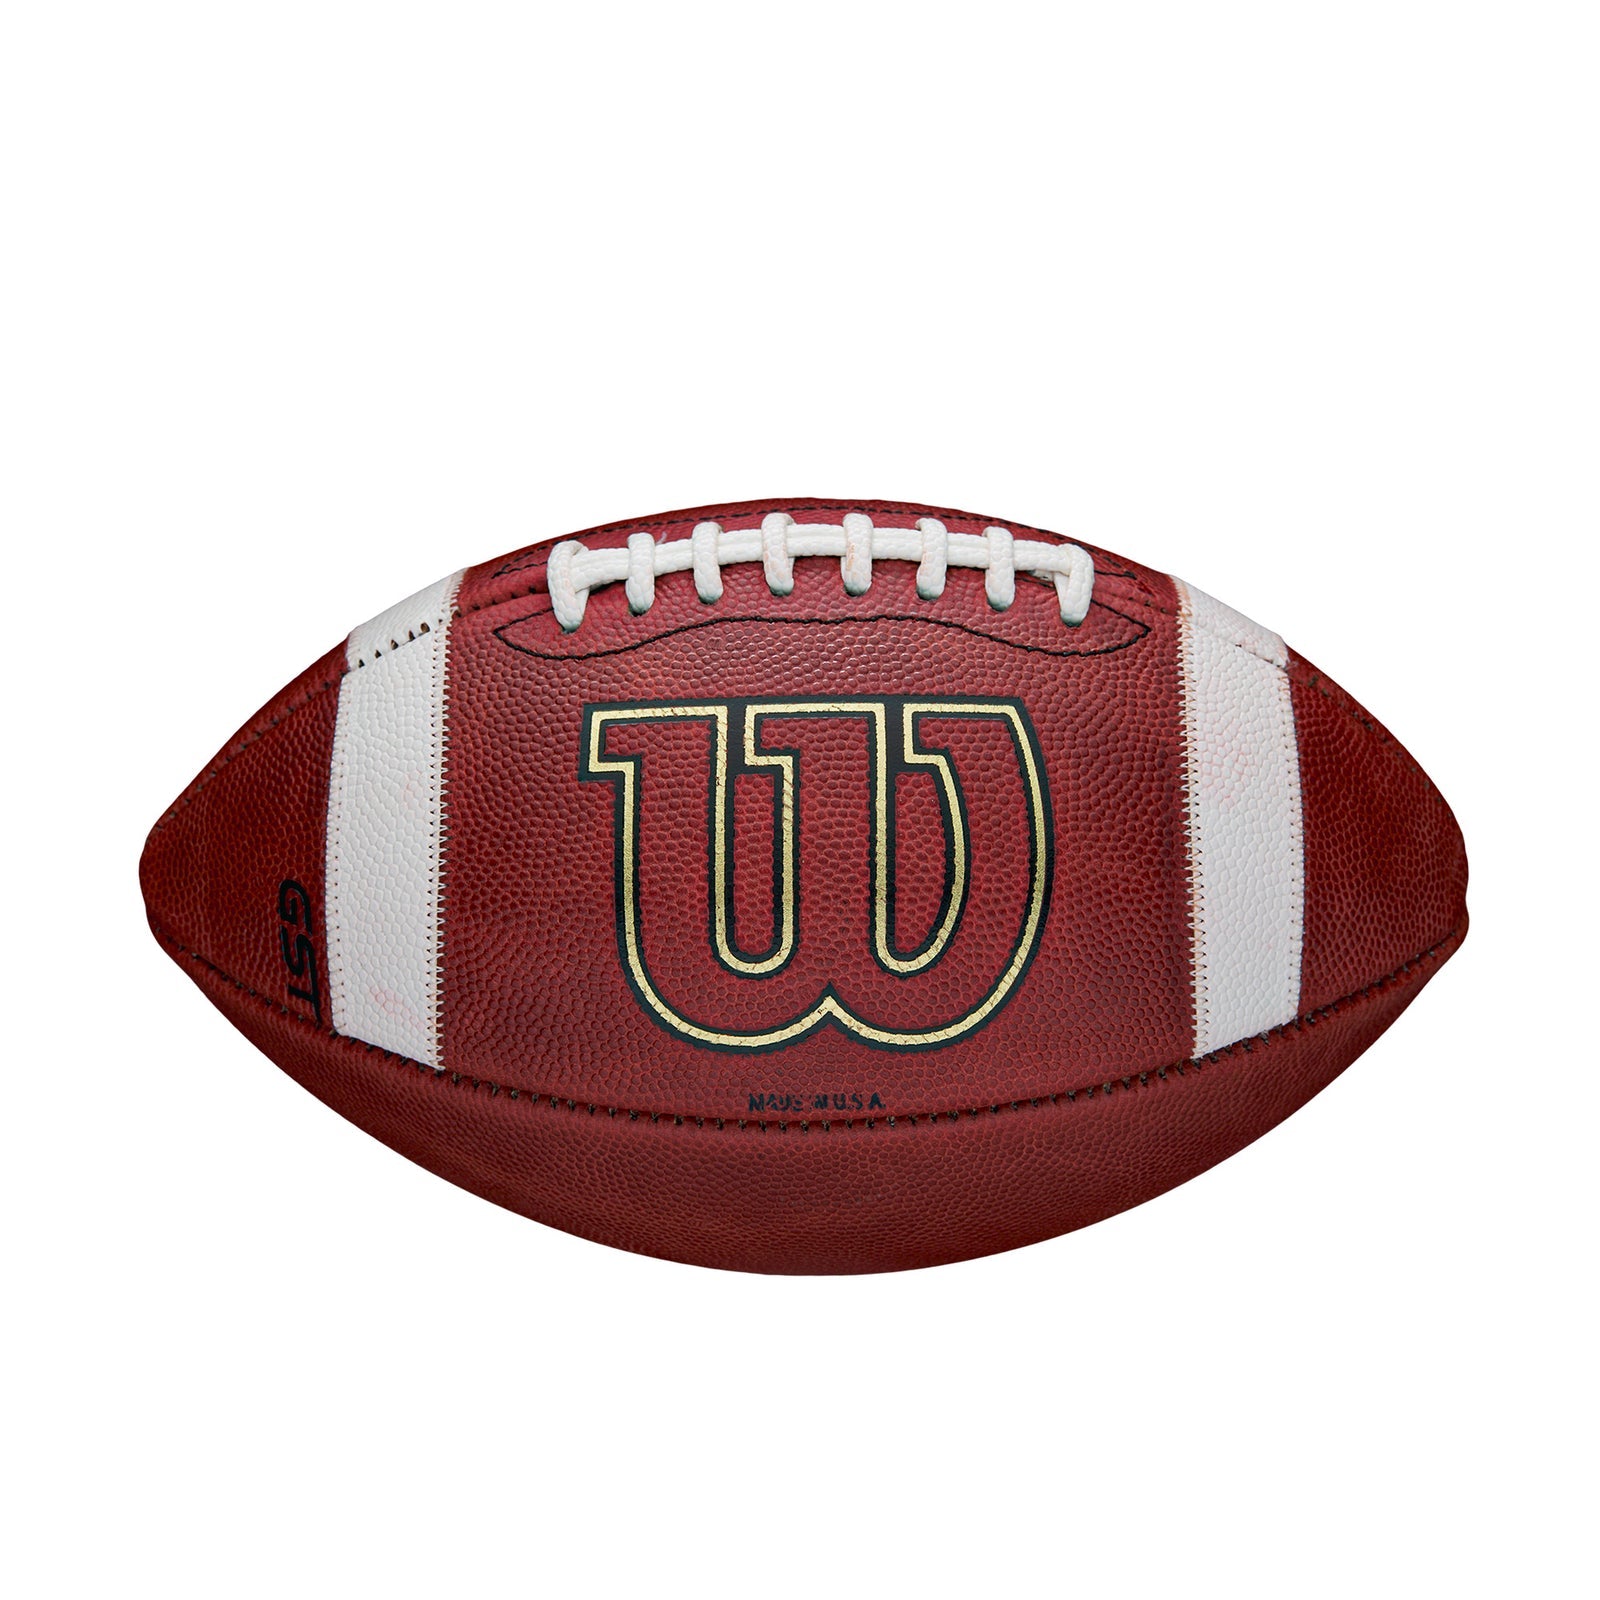 Wilson 1002 GST Leather Football - Blem - Official Size